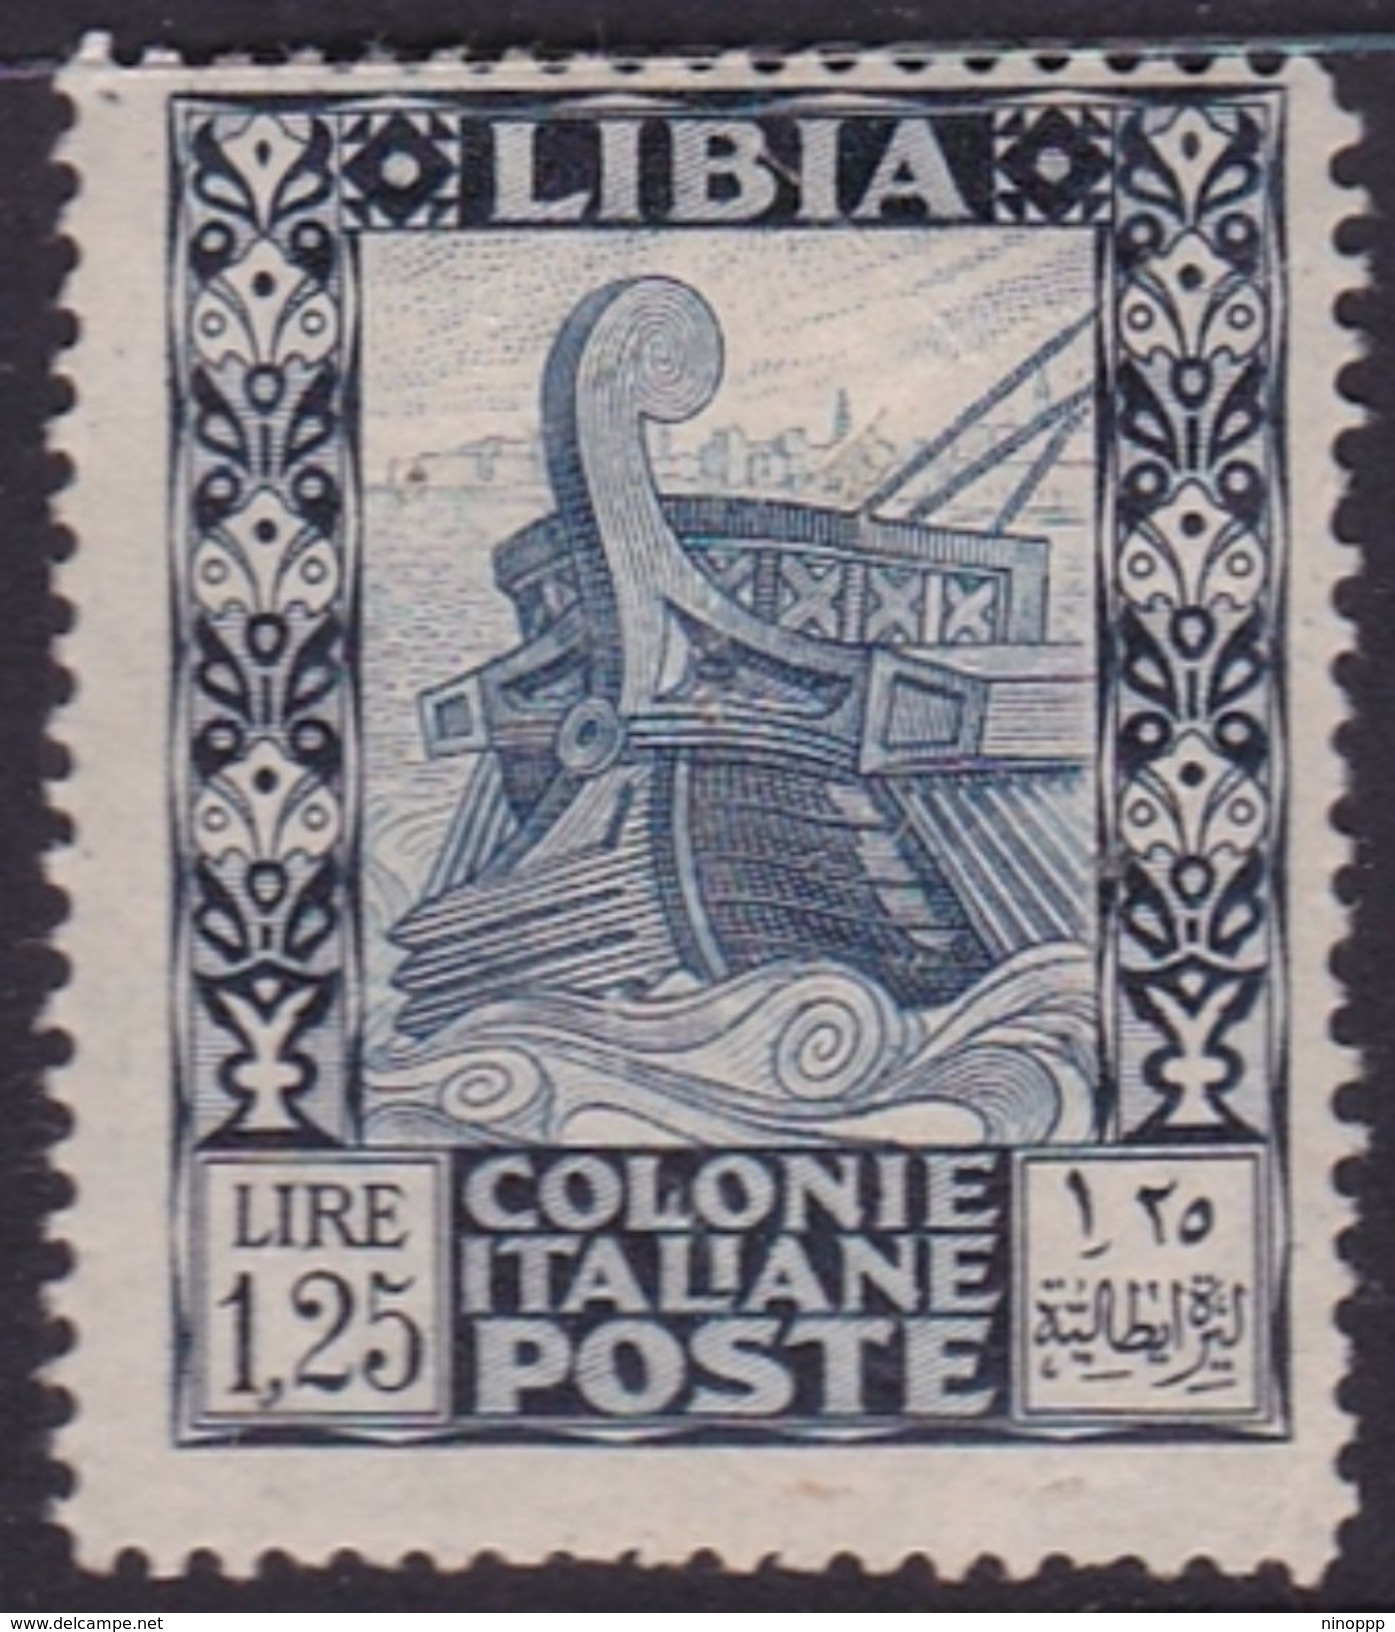 Italy-Colonies And Territories-Libya S 105 1931 Ancient Galley 1,25 Lira,perf 14,Mint Hinged - Libya